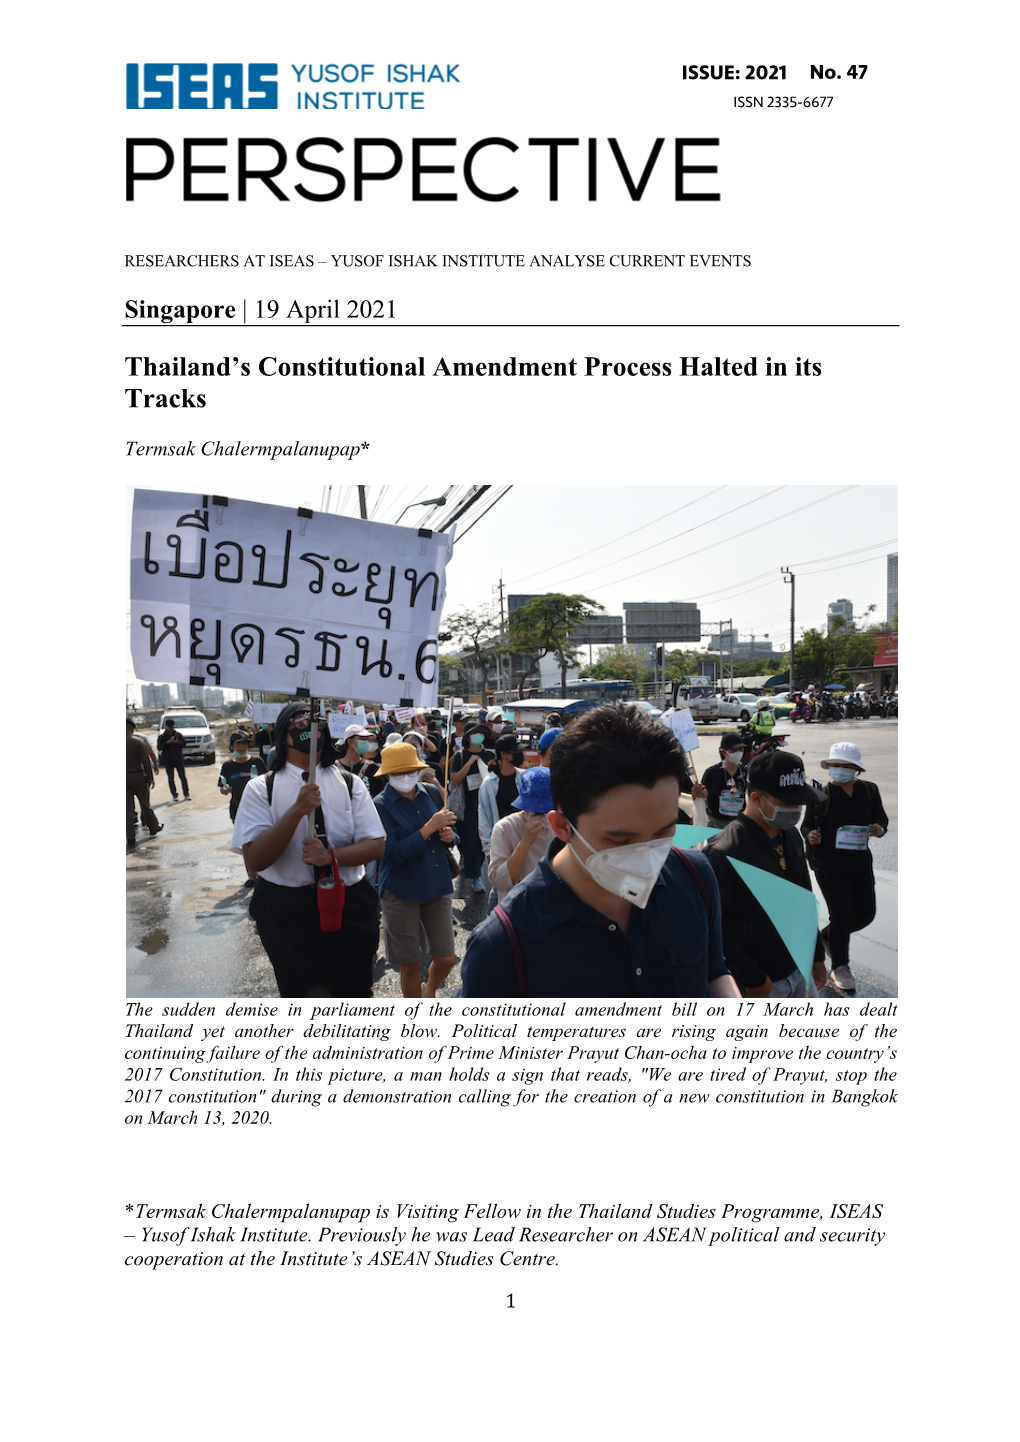 Thailand's Constitutional Amendment Process Halted in Its Tracks